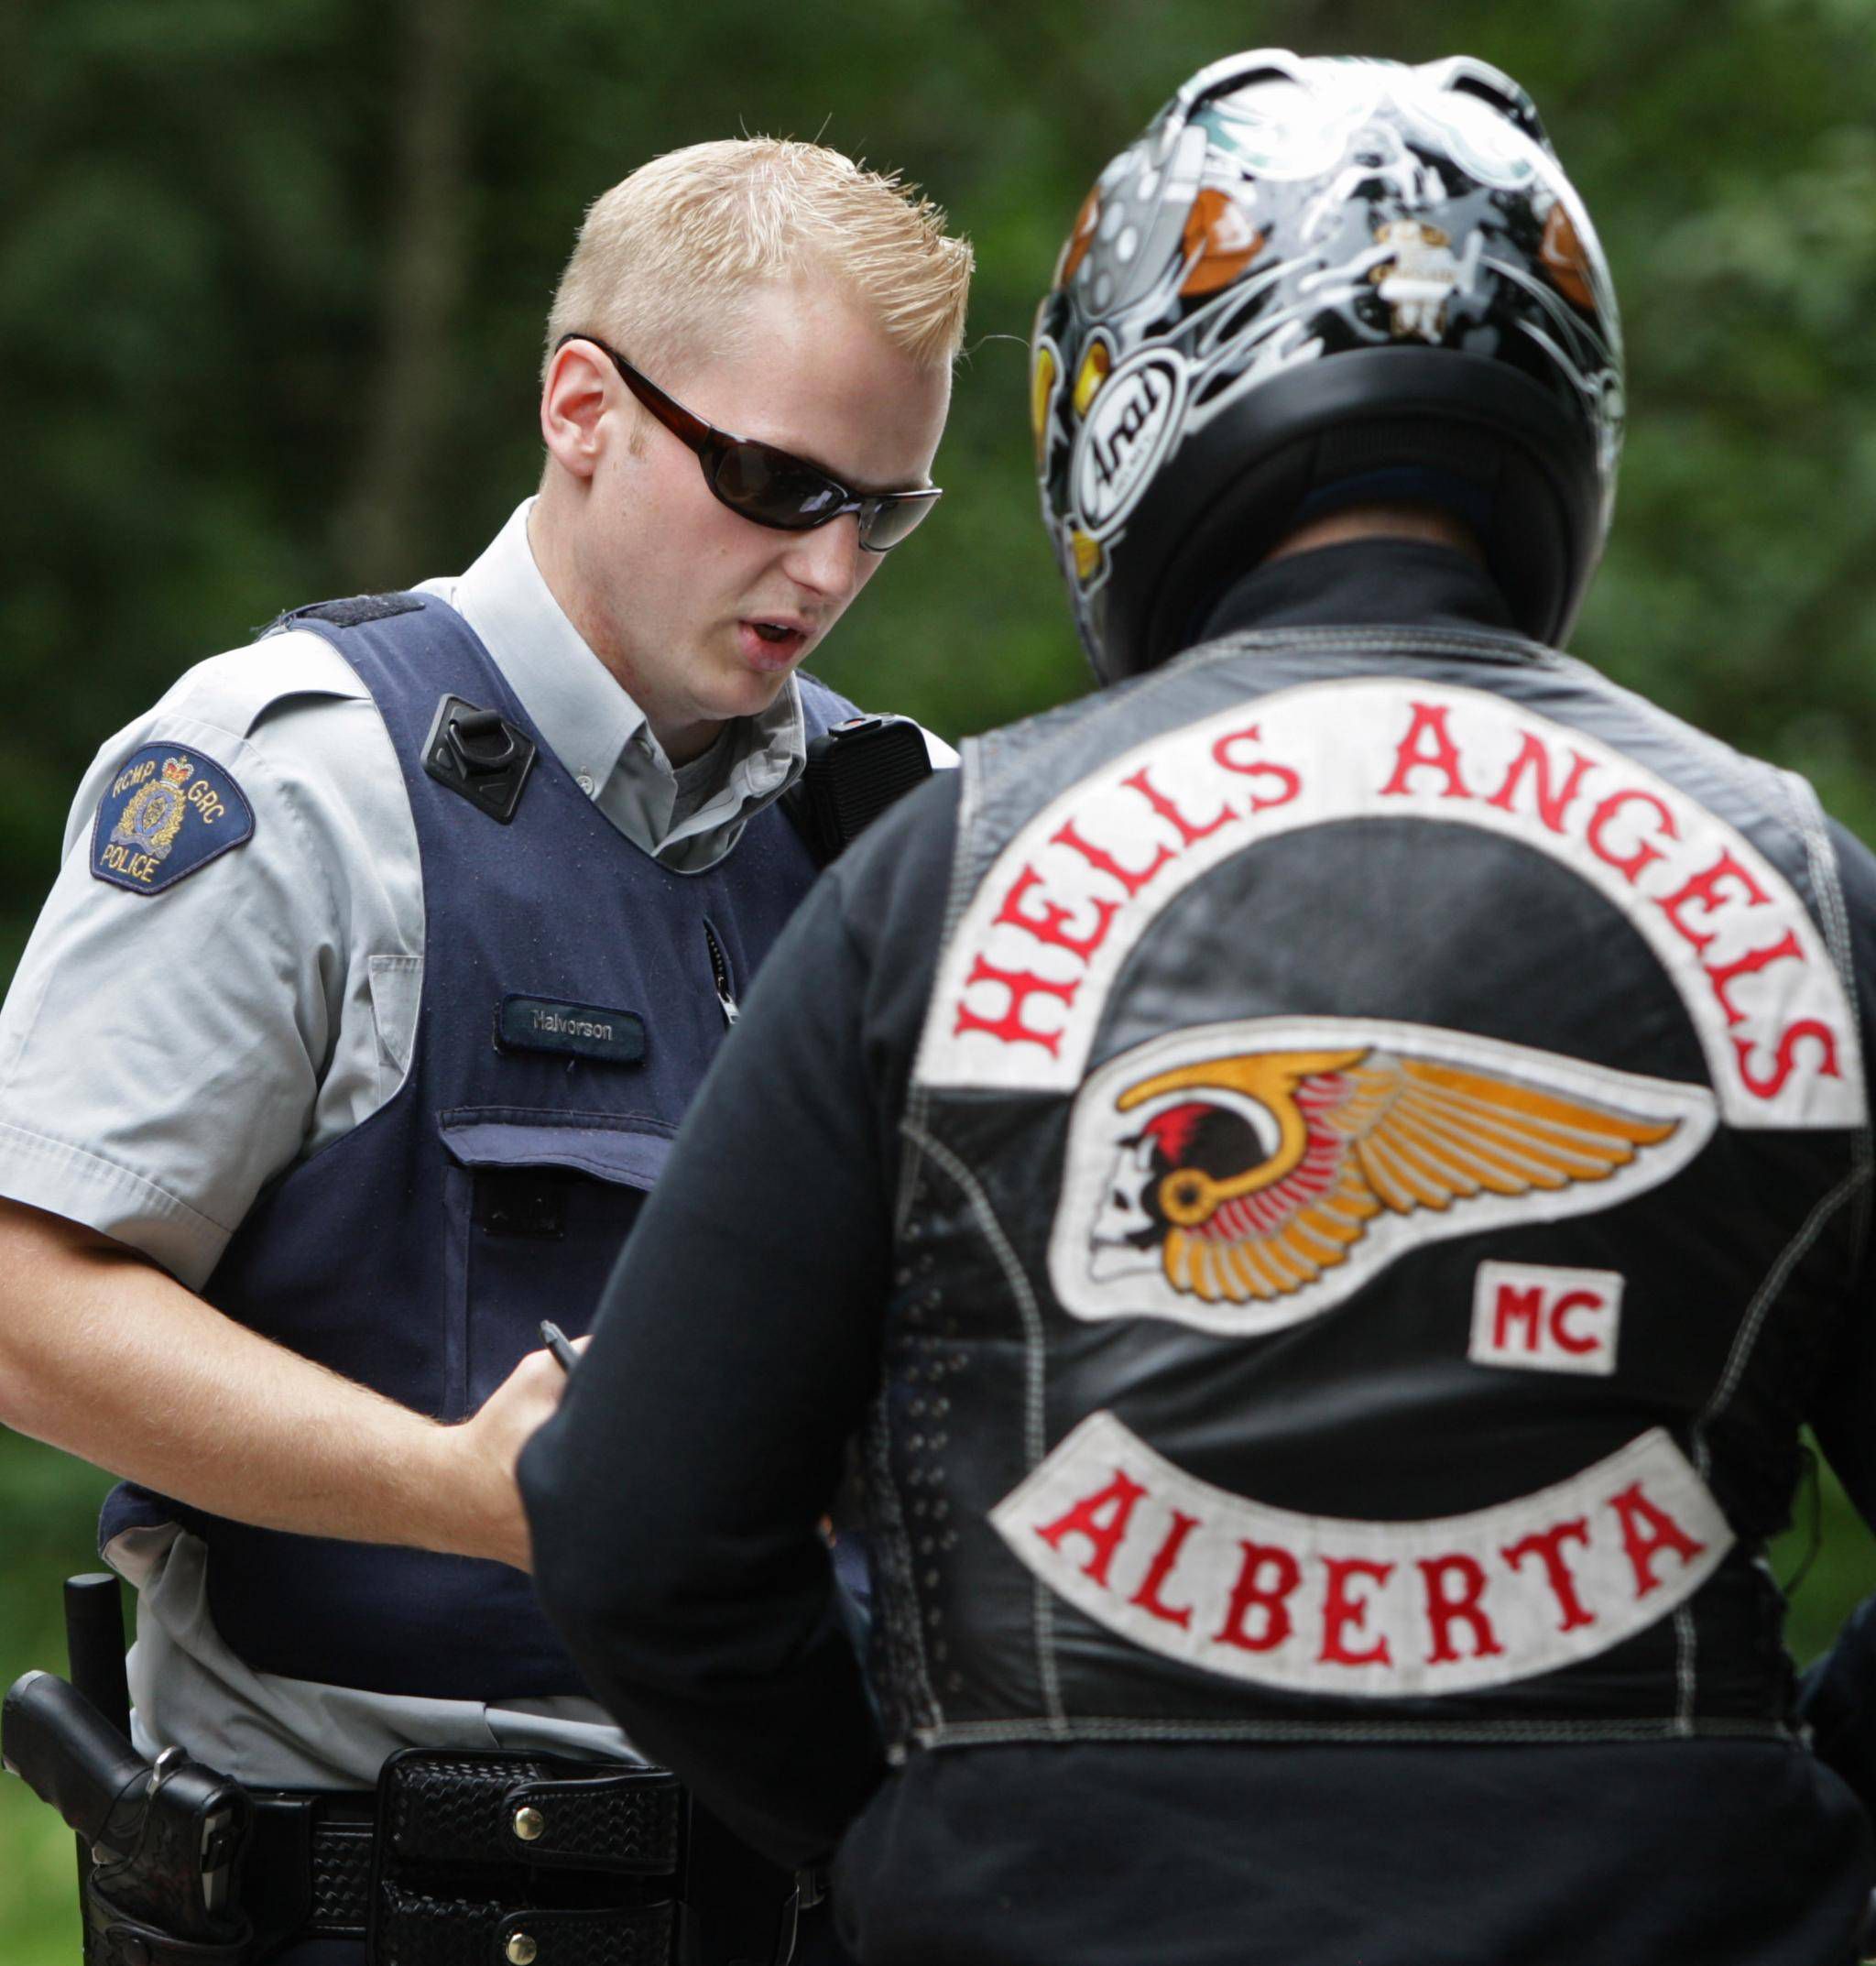 hell angels and police